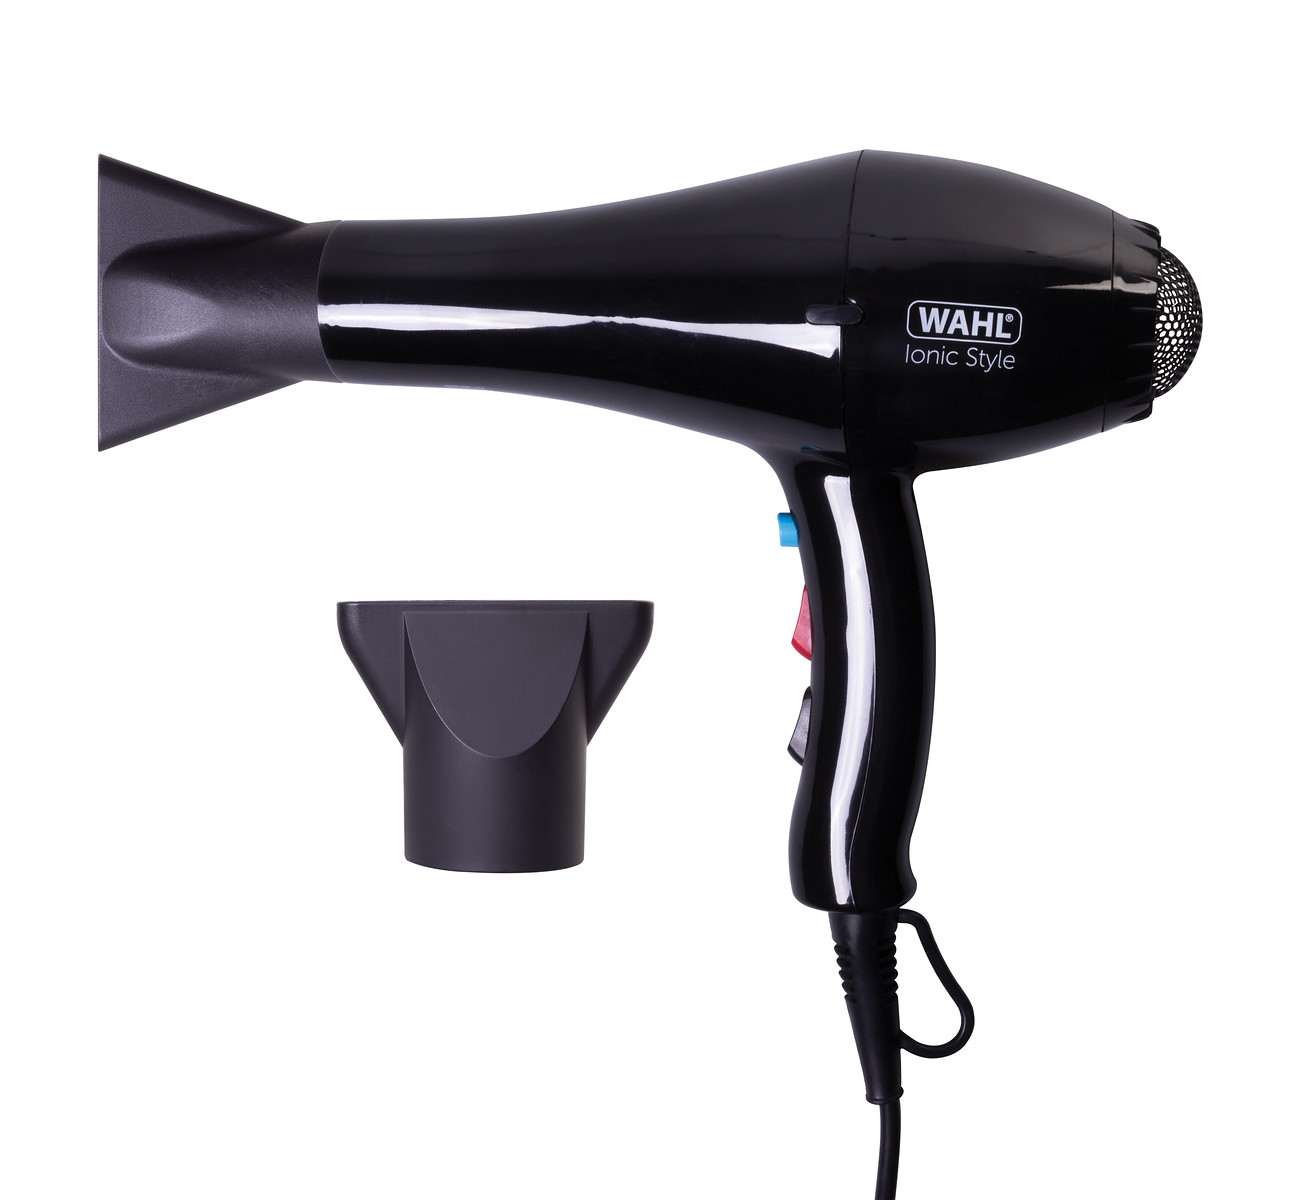 Hair Dryer Ionic Style Black 2000w WAHL